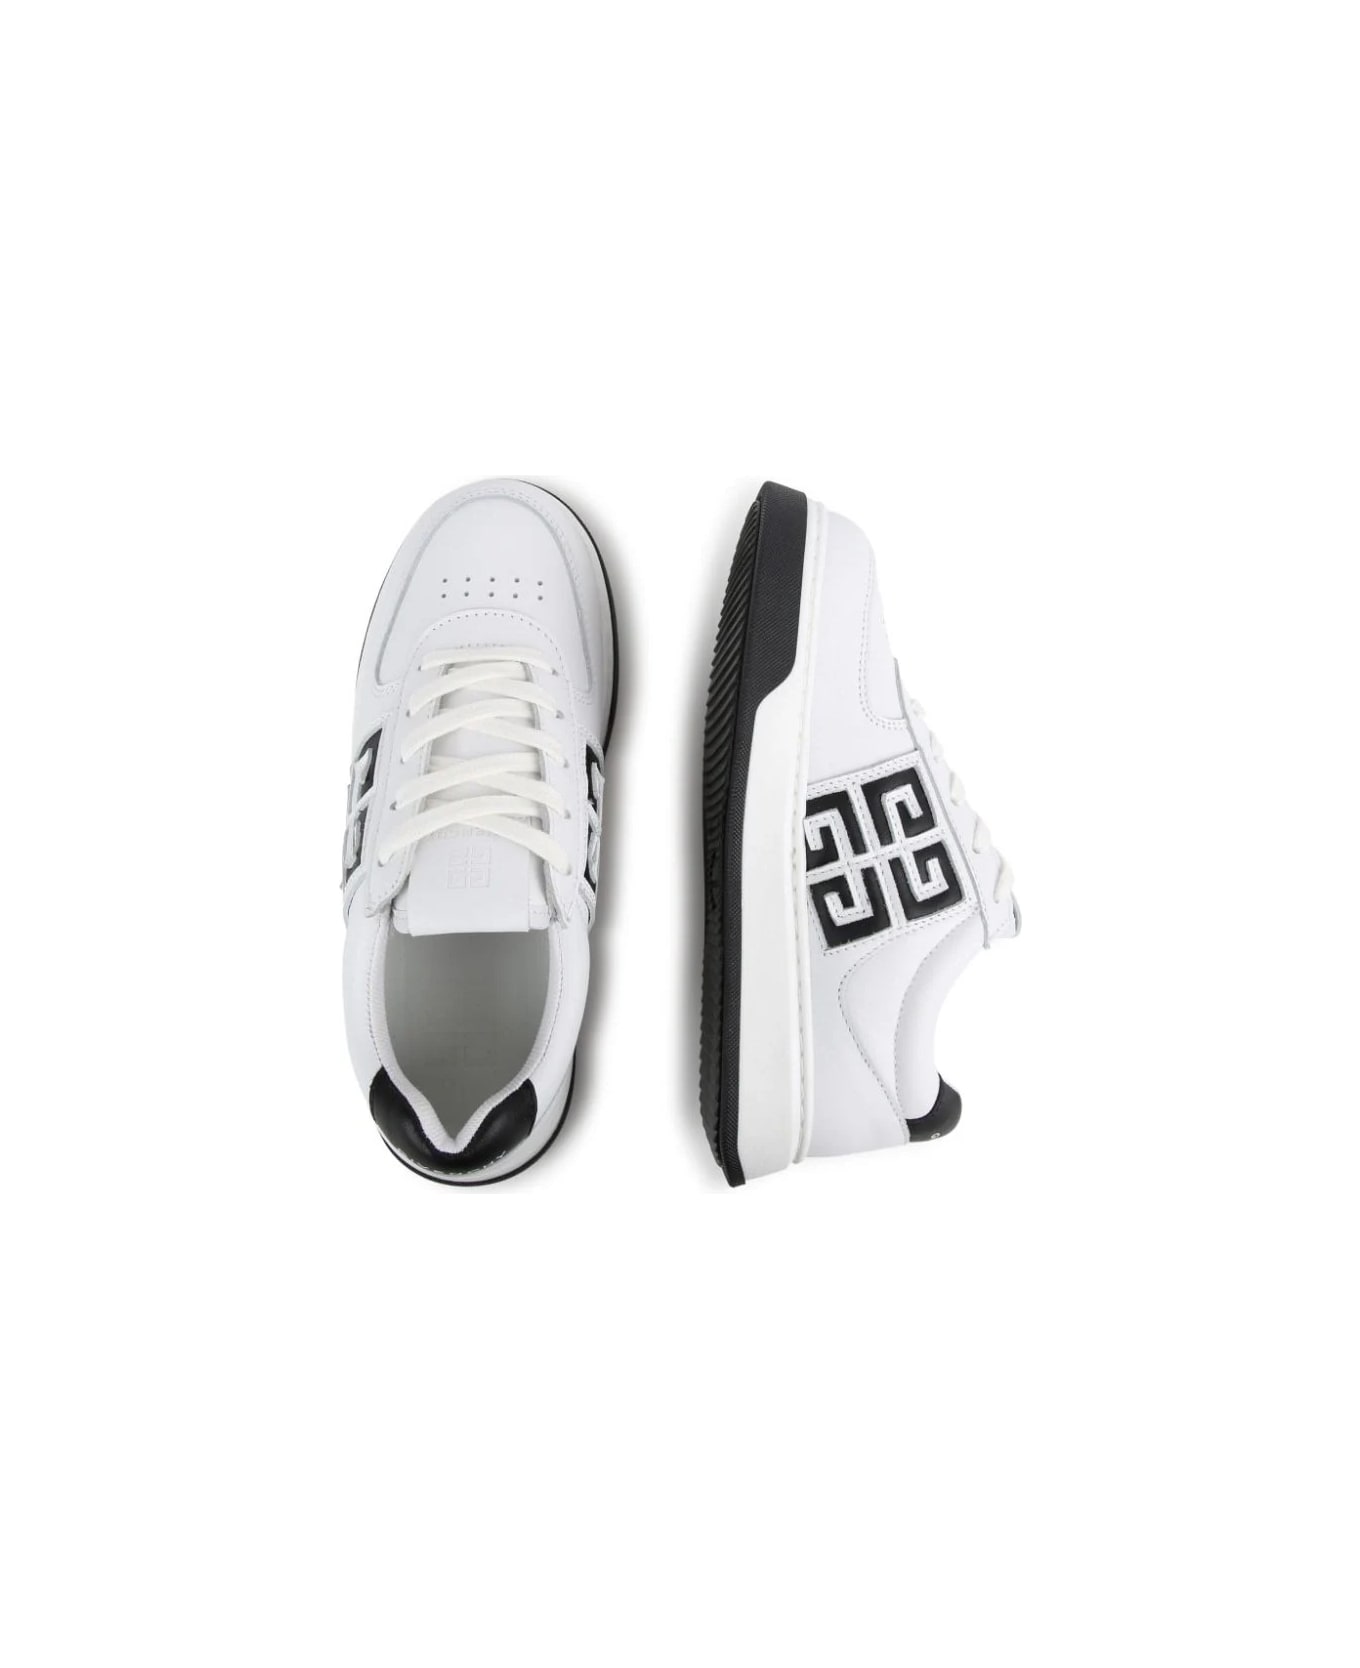 Givenchy G4 Sneakers In White And Black Leather - White